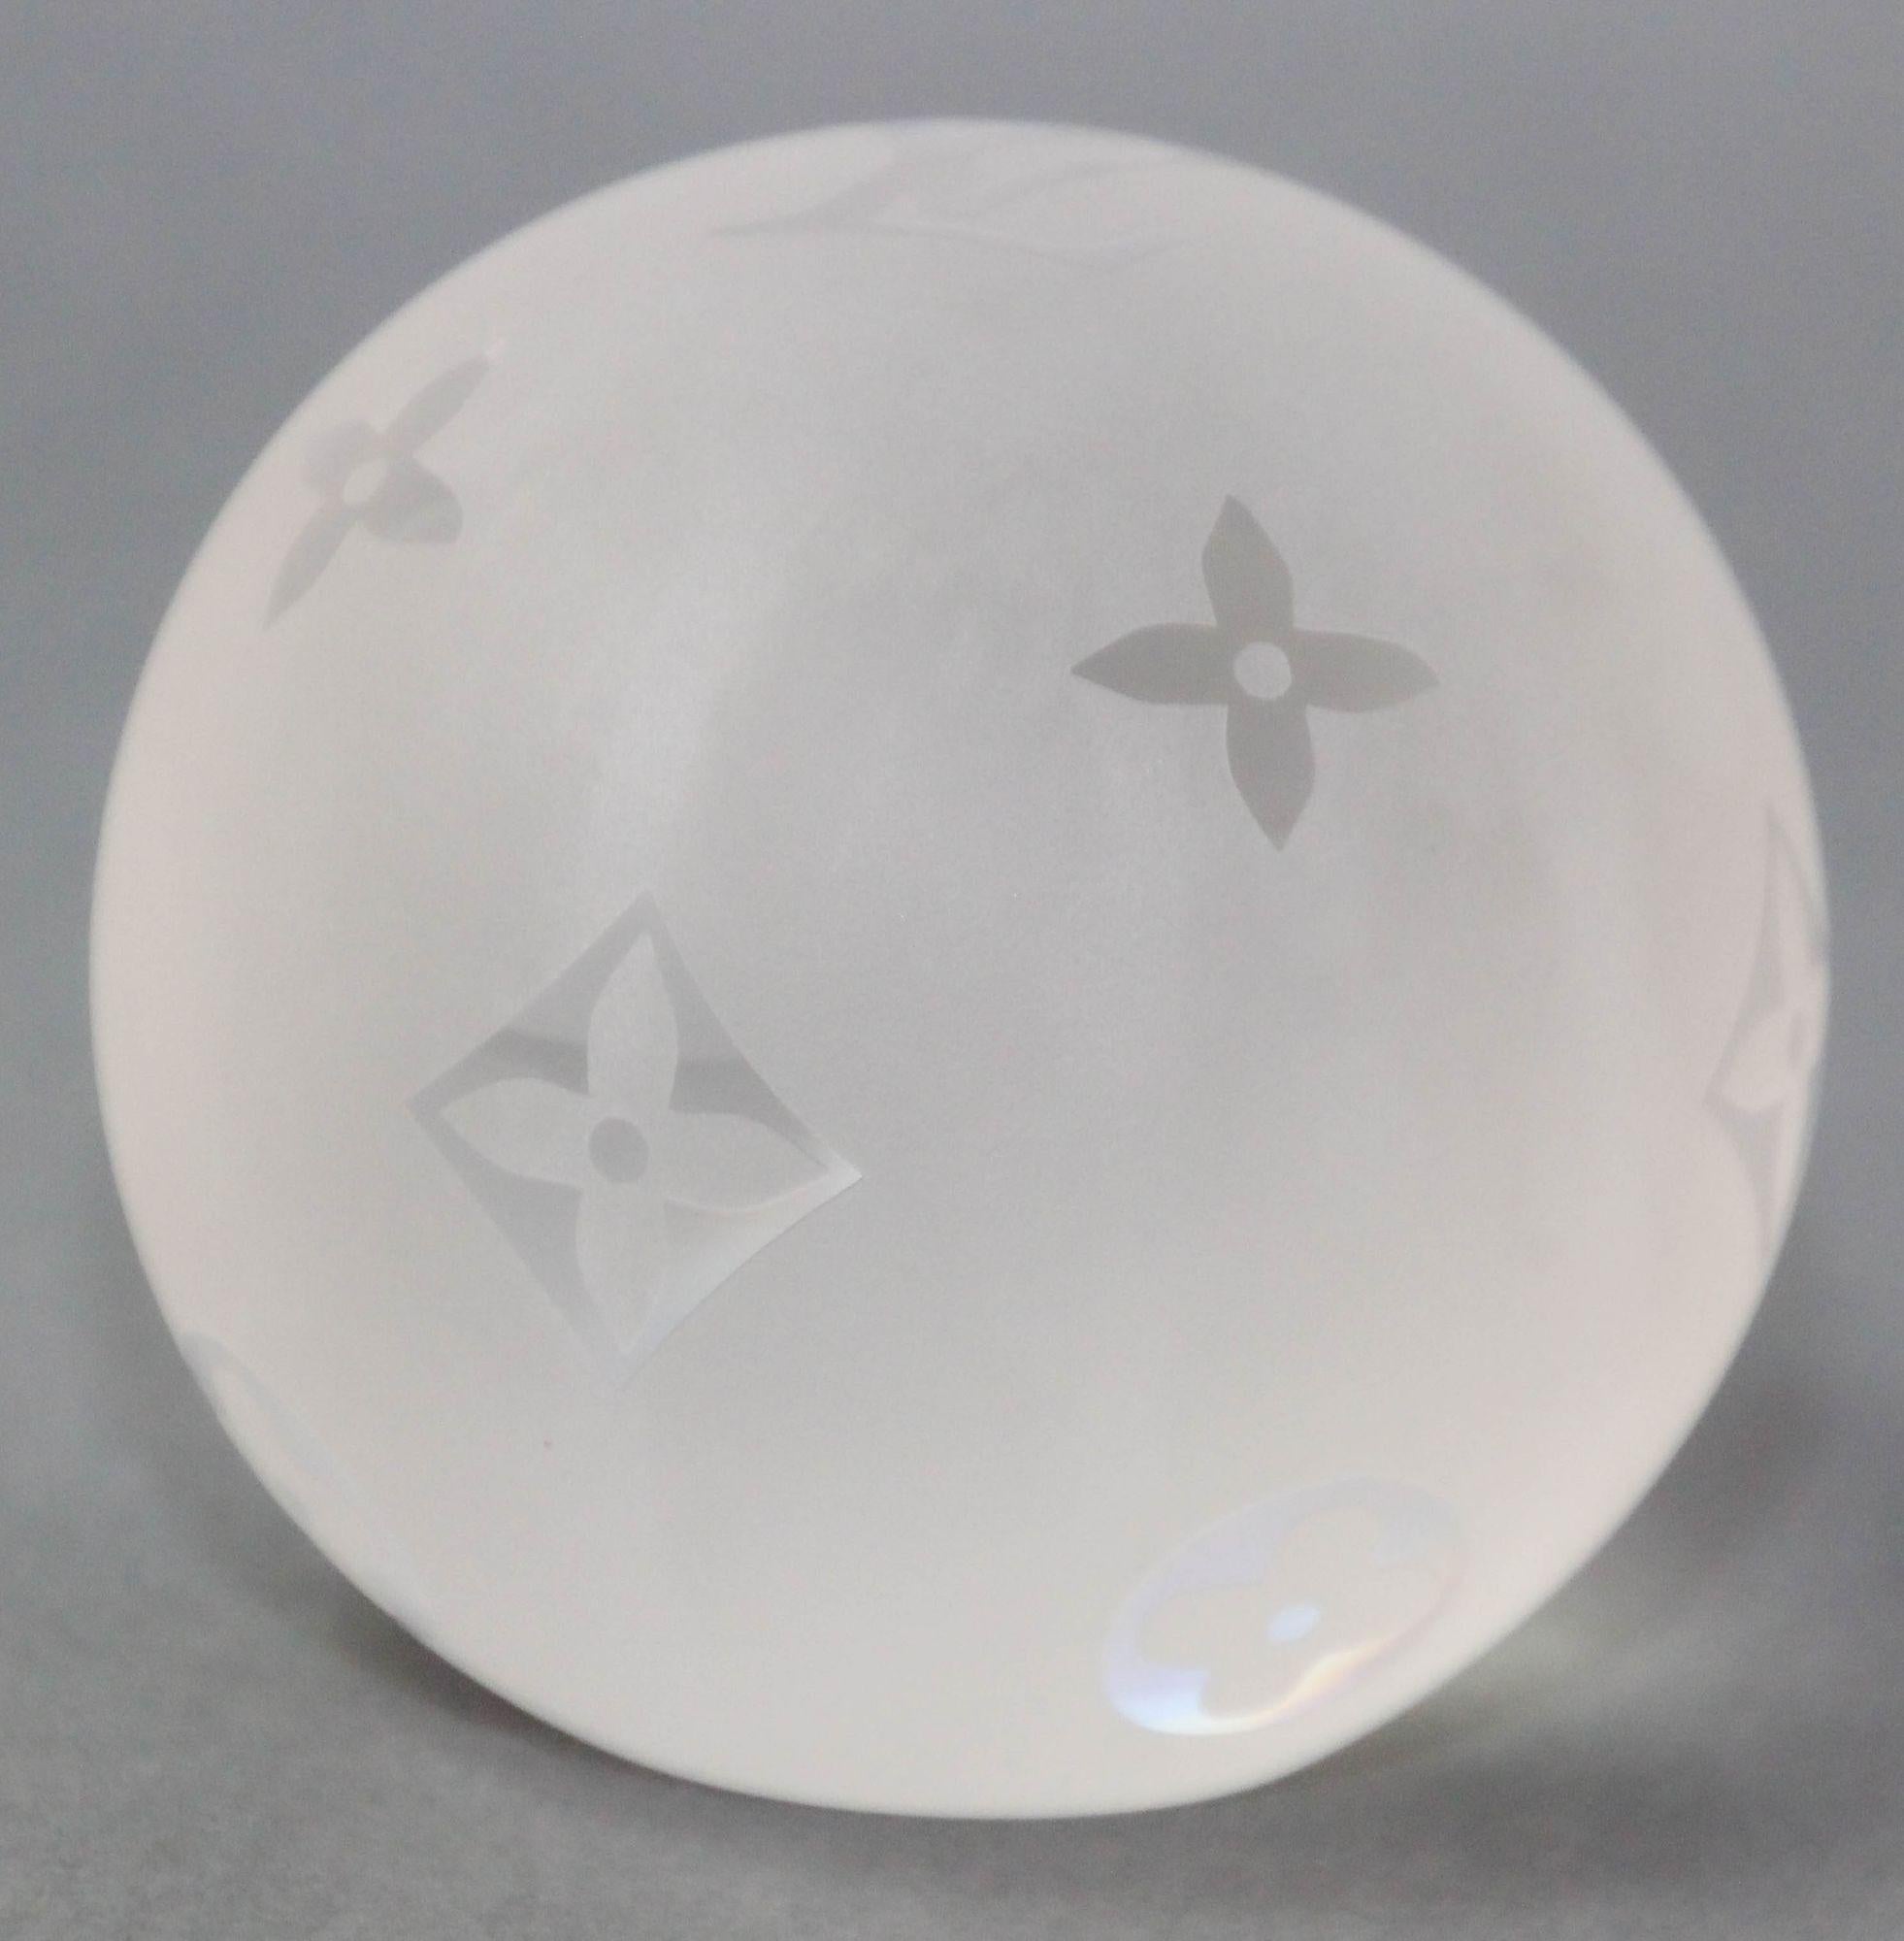 LOUIS VUITTON Paperweight Monogram Clear Crystal Paper Weight 3